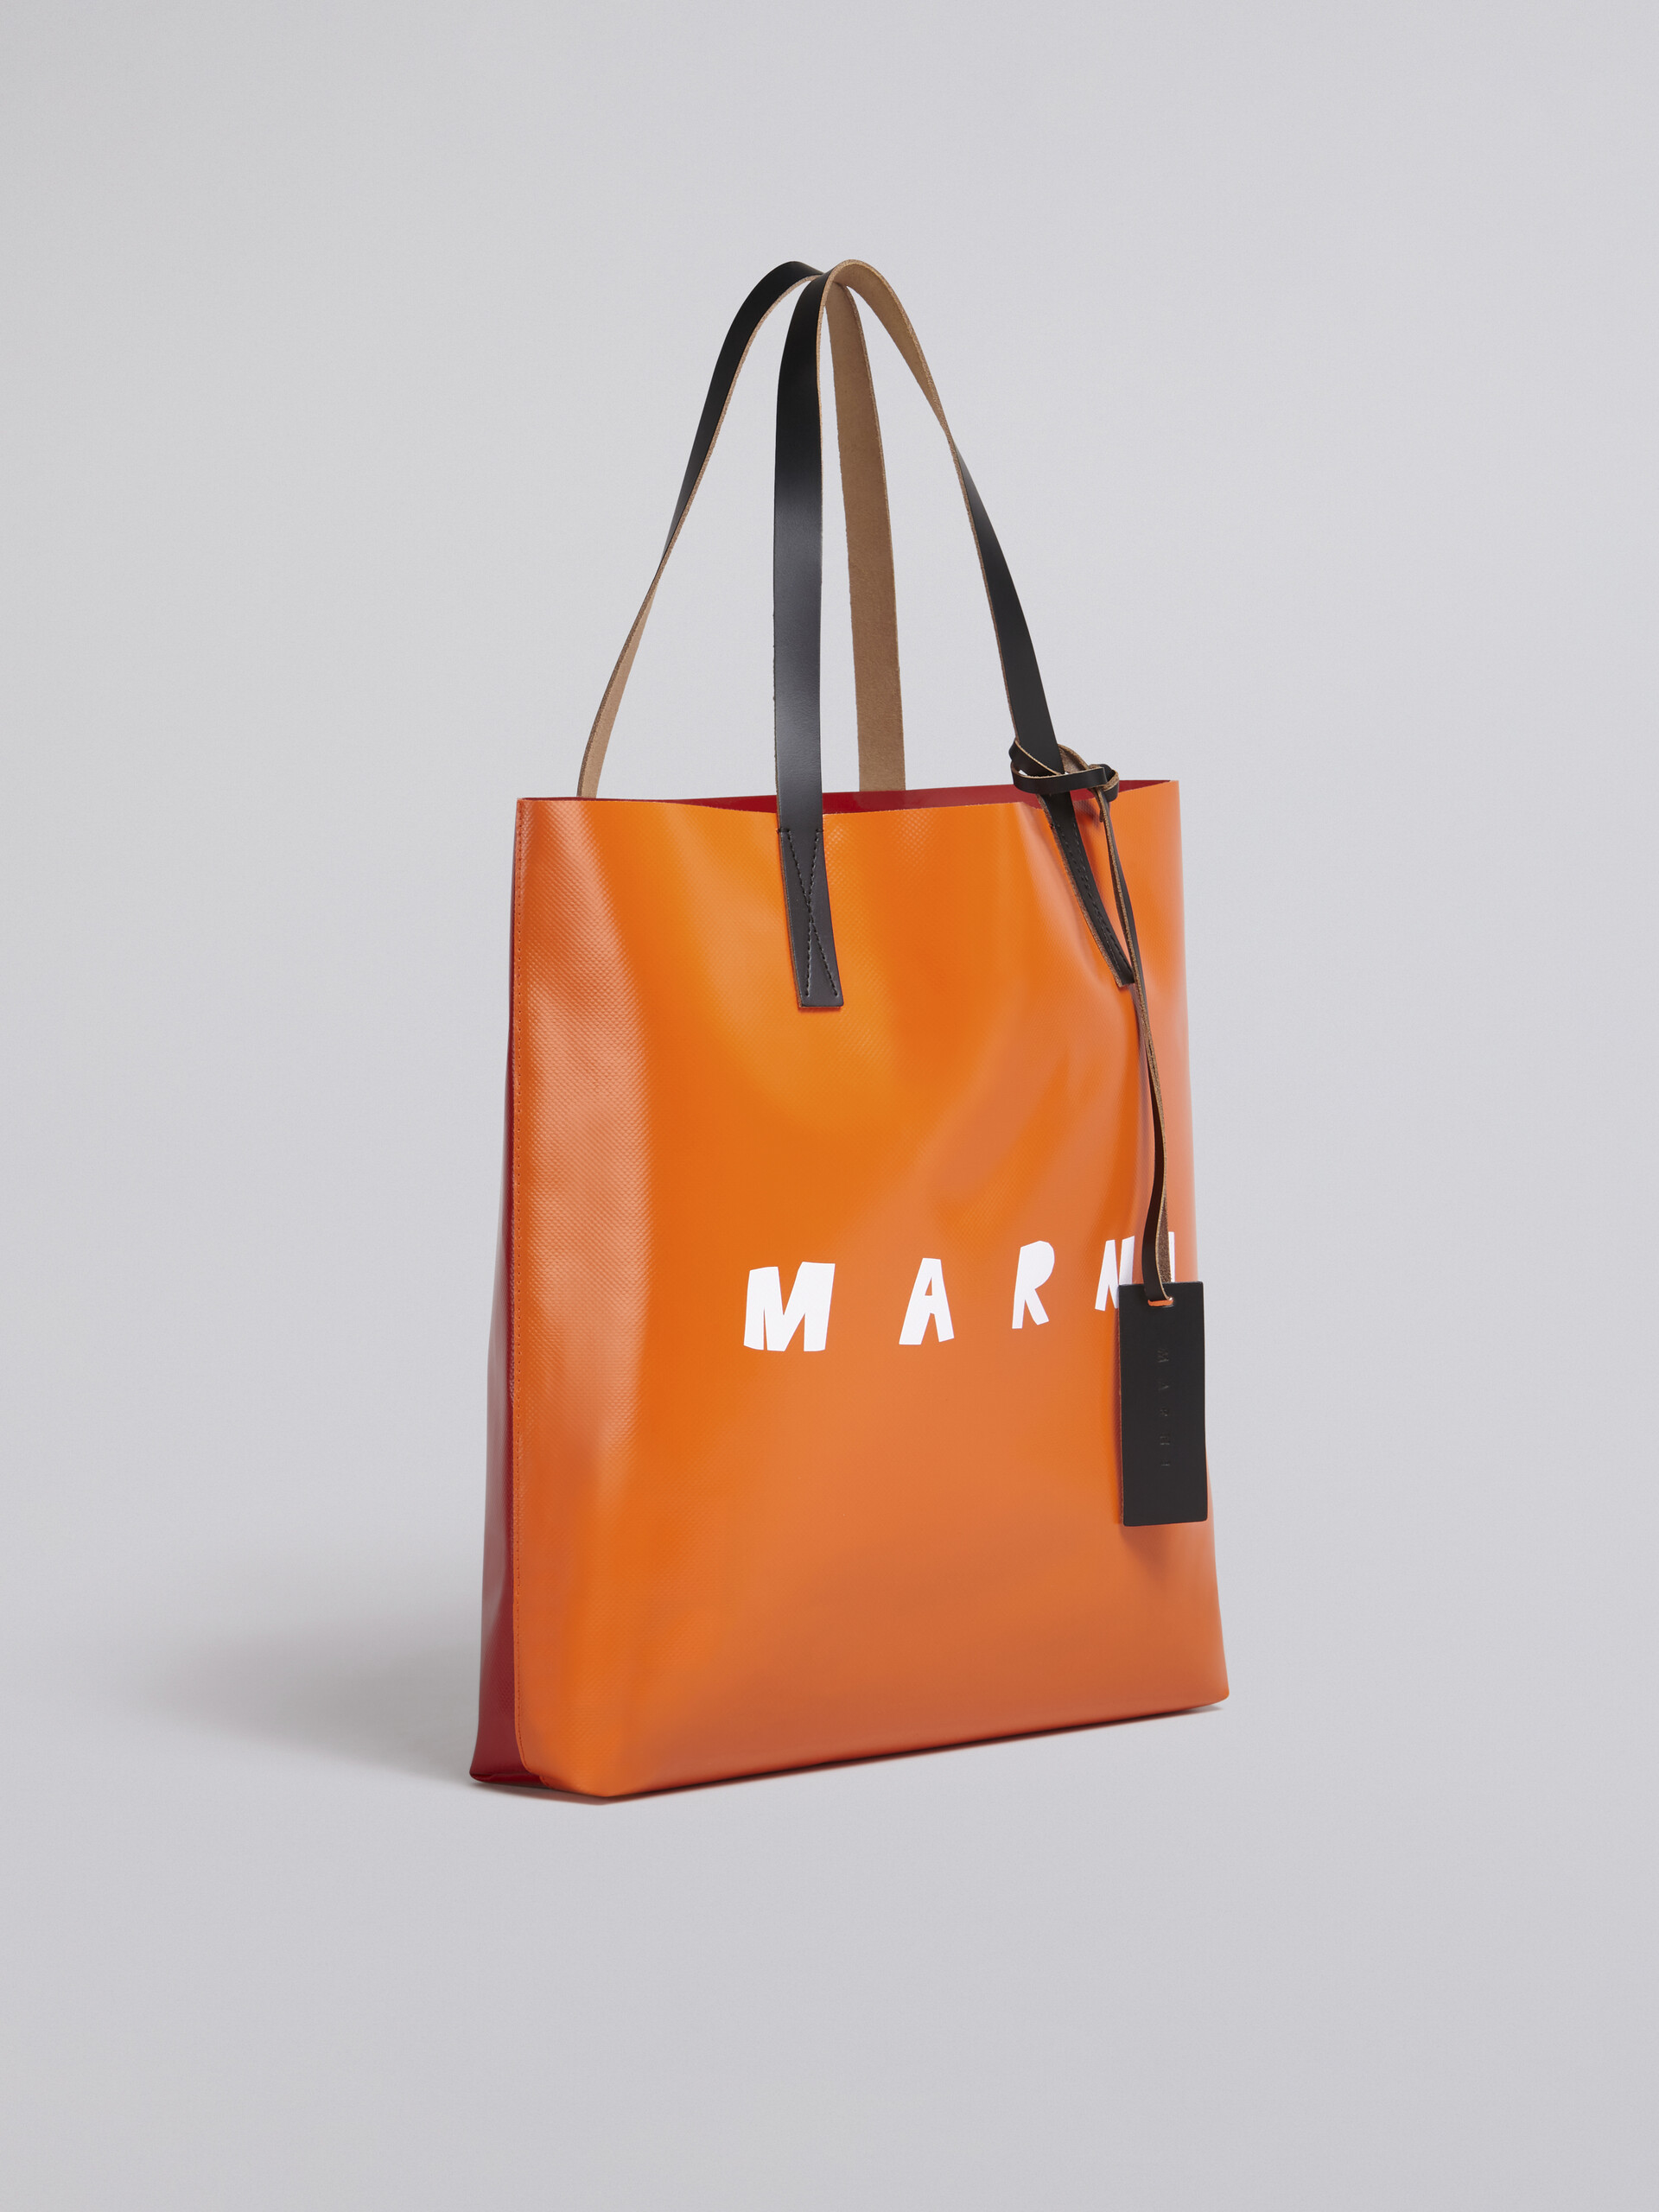 Red and orange TRIBECA shopping bag with Marni logo - Shopping Bags - Image 5